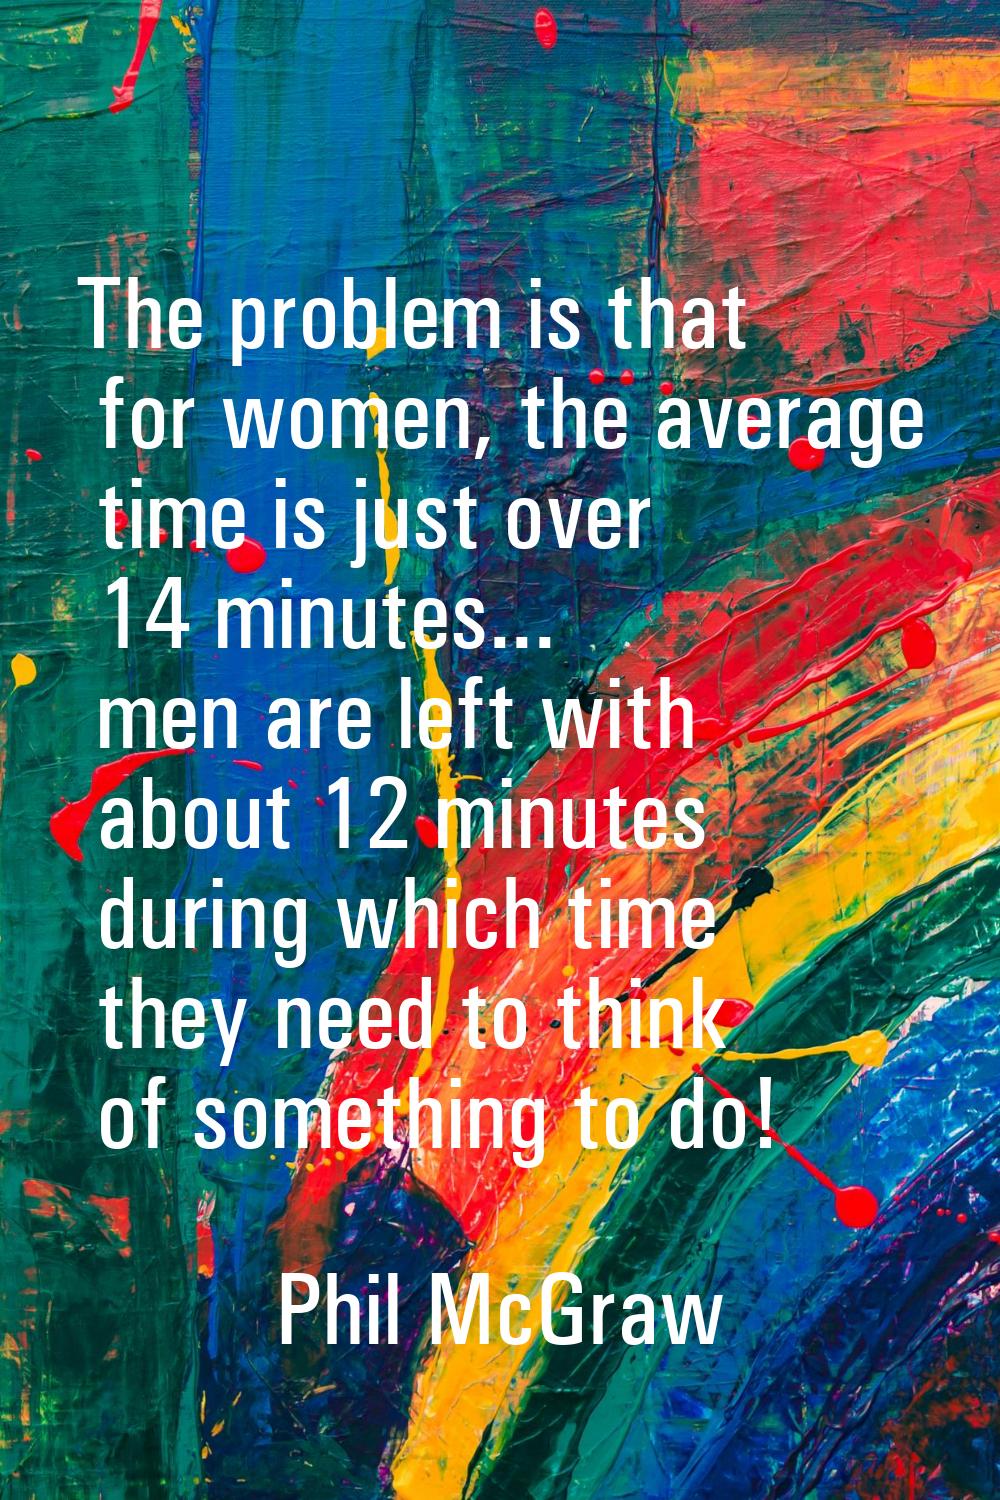 The problem is that for women, the average time is just over 14 minutes... men are left with about 